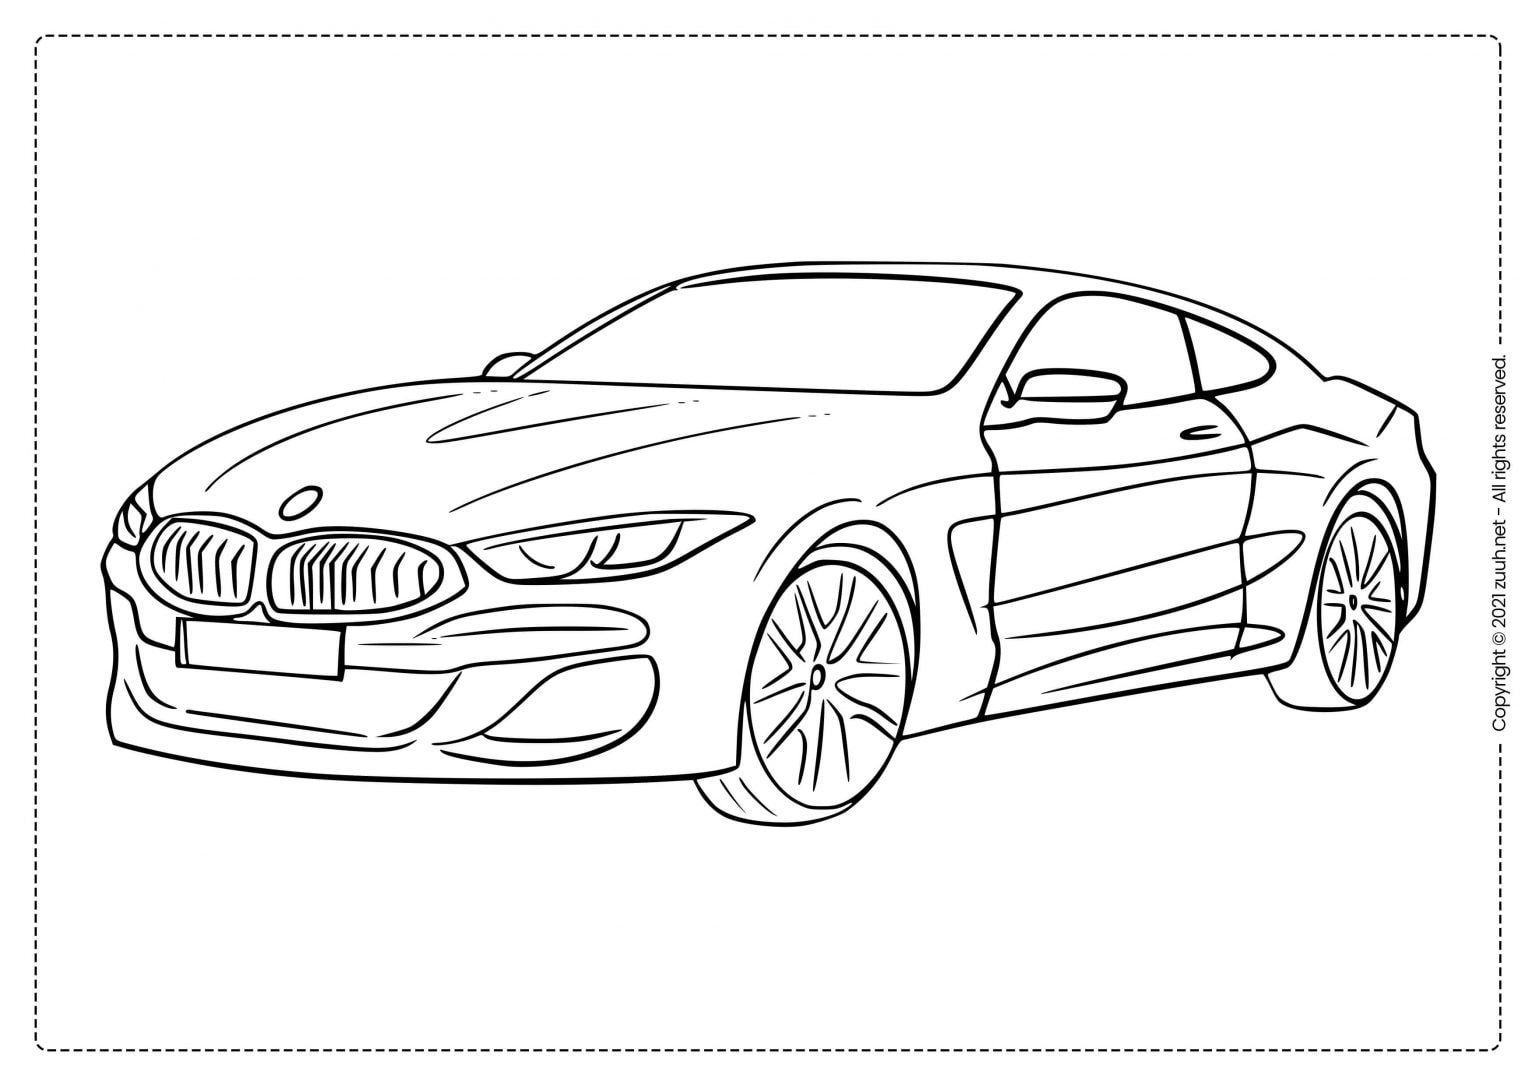 Fantastic bmw racing coloring pages